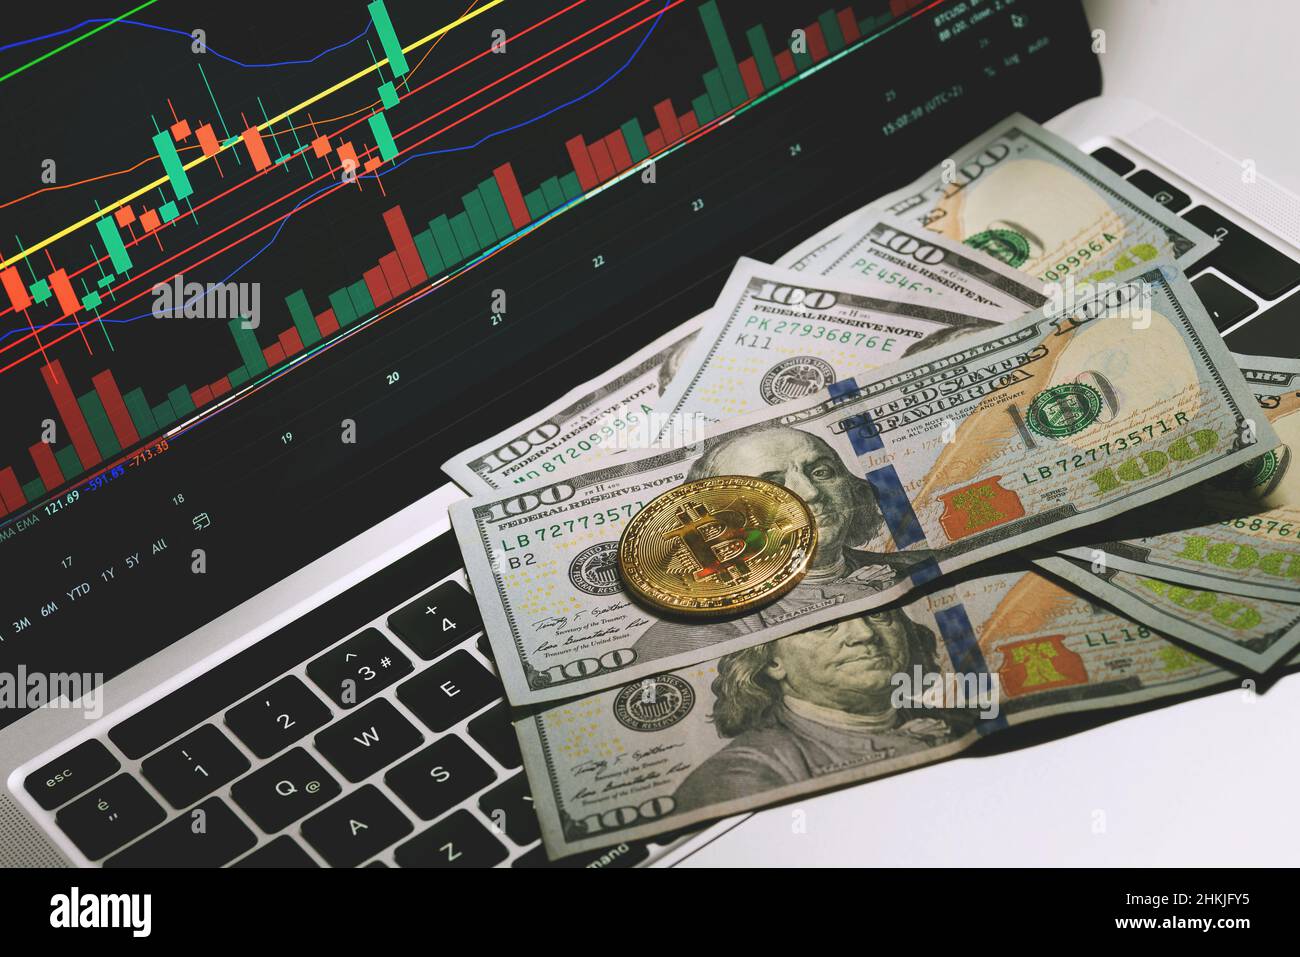 Close up shot of 100 dollar banknotes and a bitcoin coin on them and on a notebook computer which has stock market indicators on the screen. Stock Photo